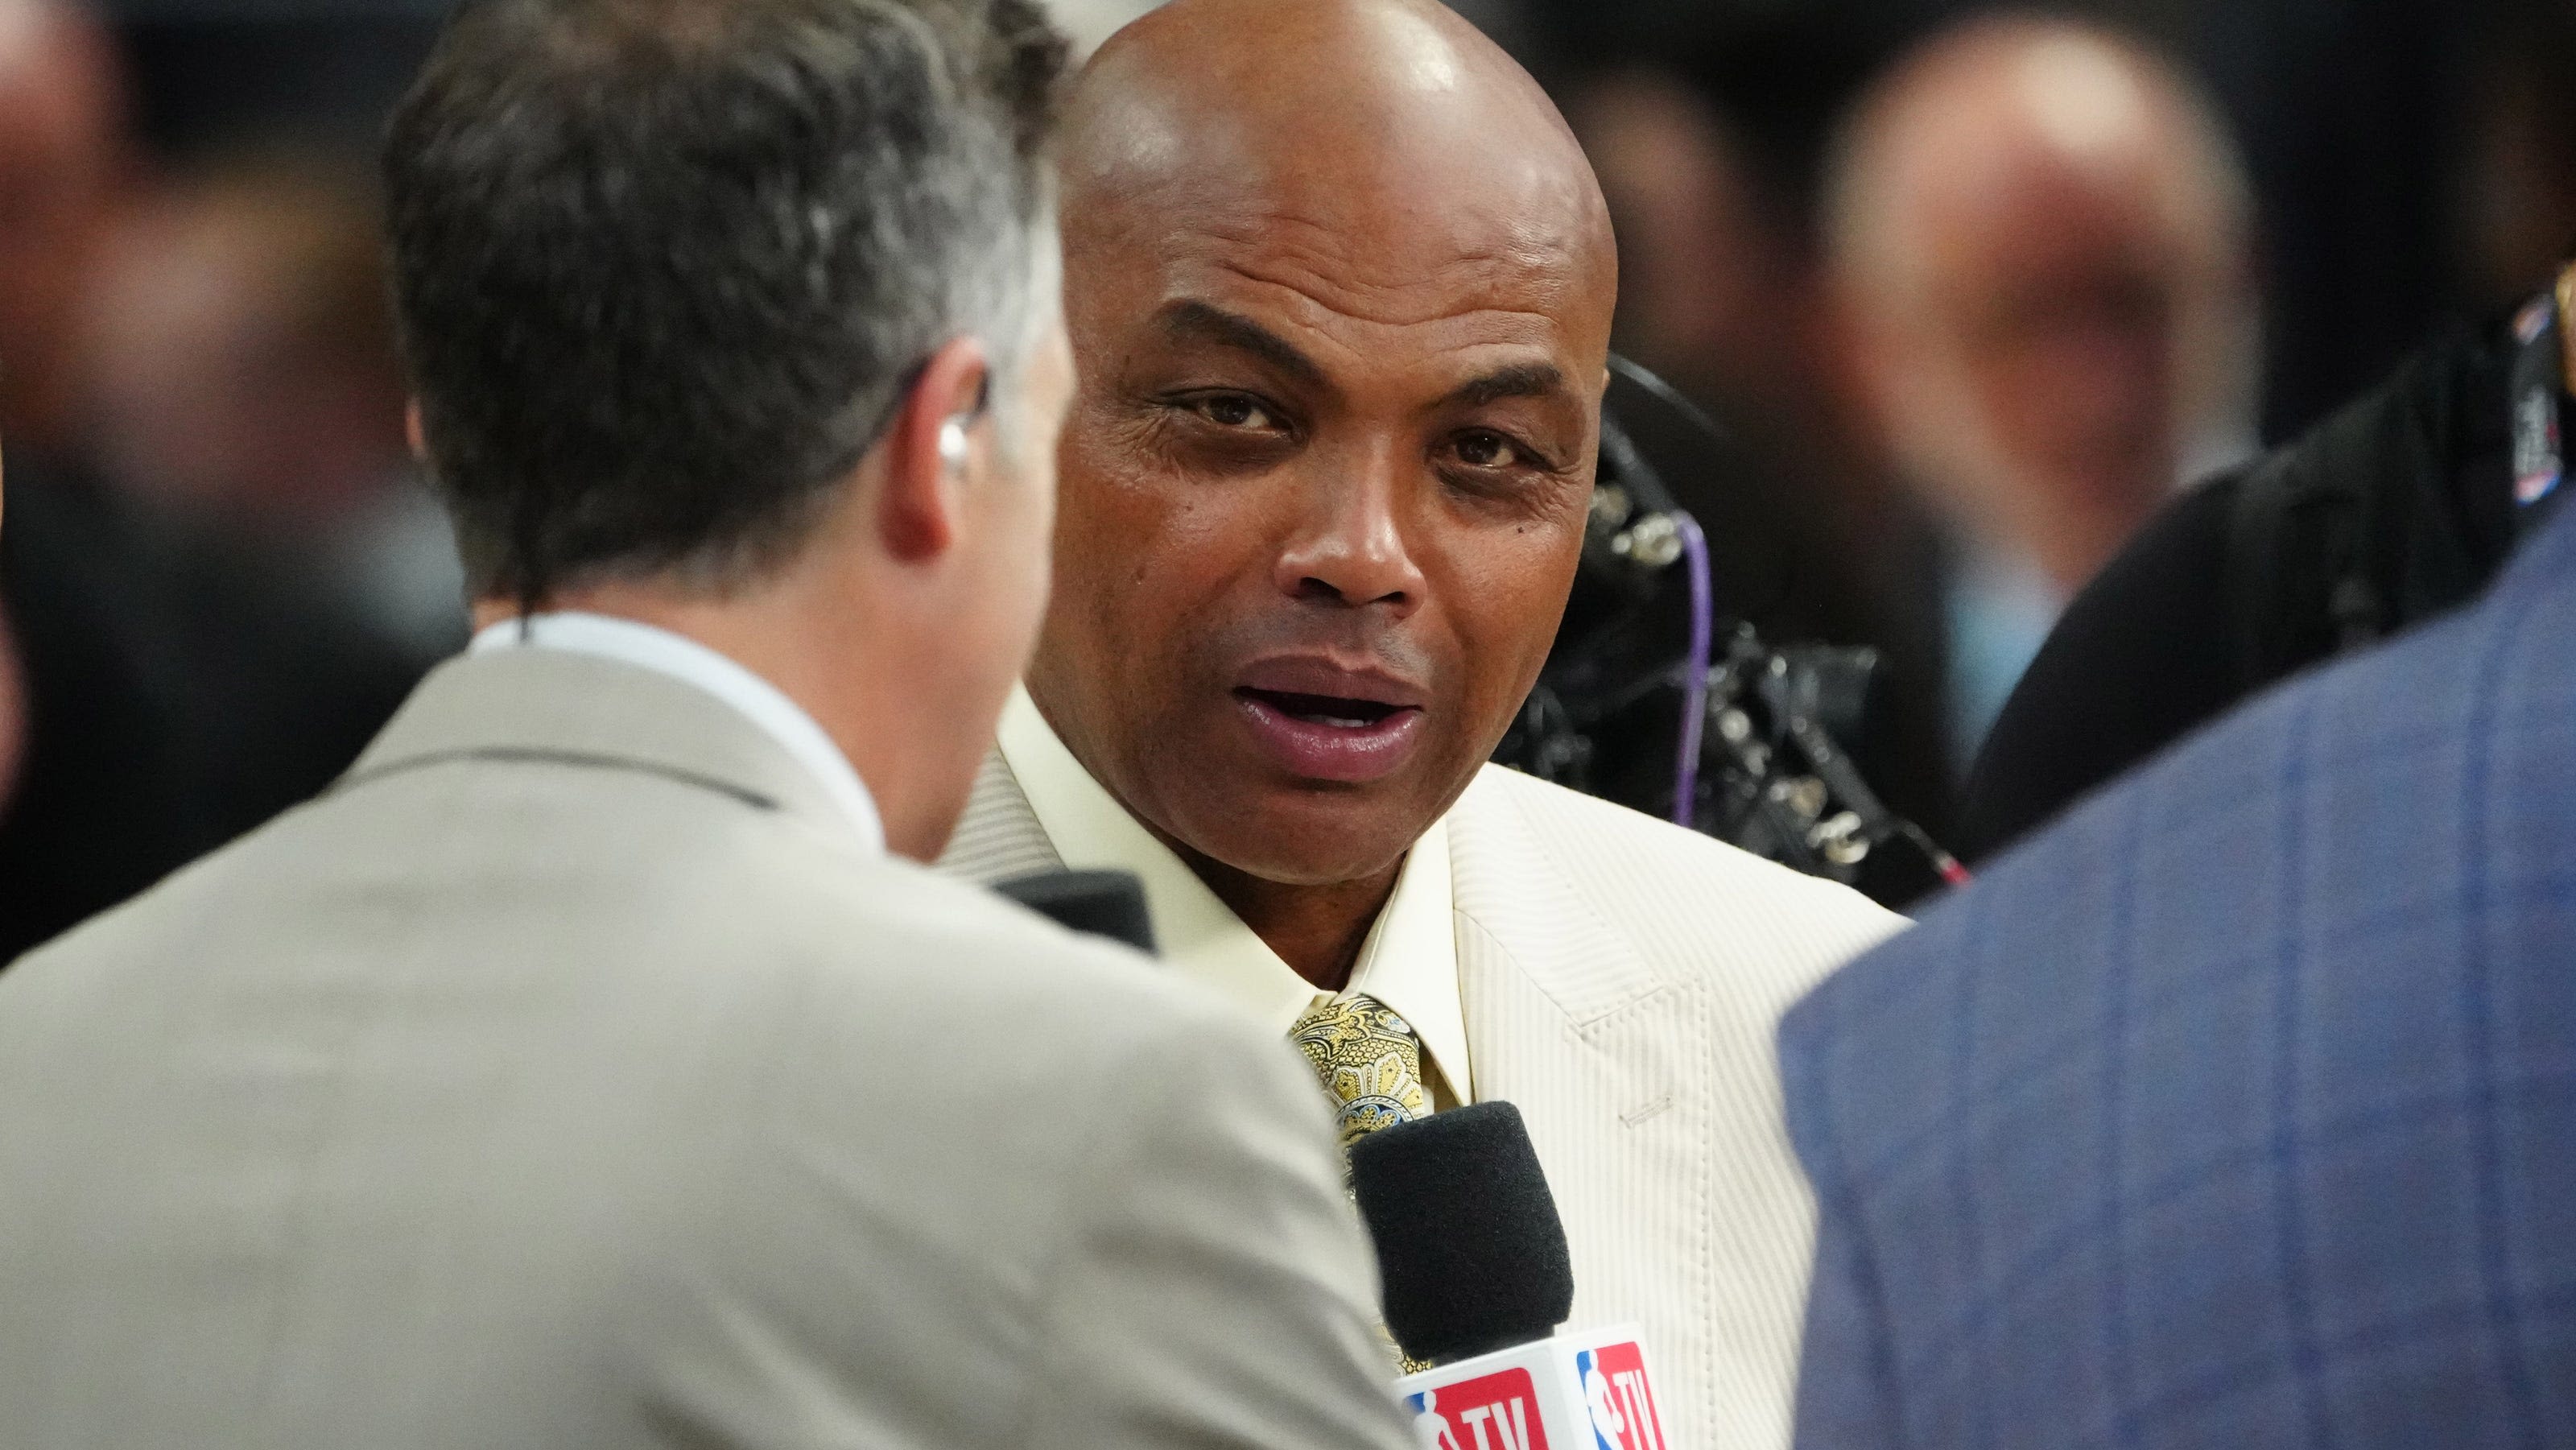 Charles Barkley open to joining ESPN, NBC and Amazon if TNT doesn't honor deal